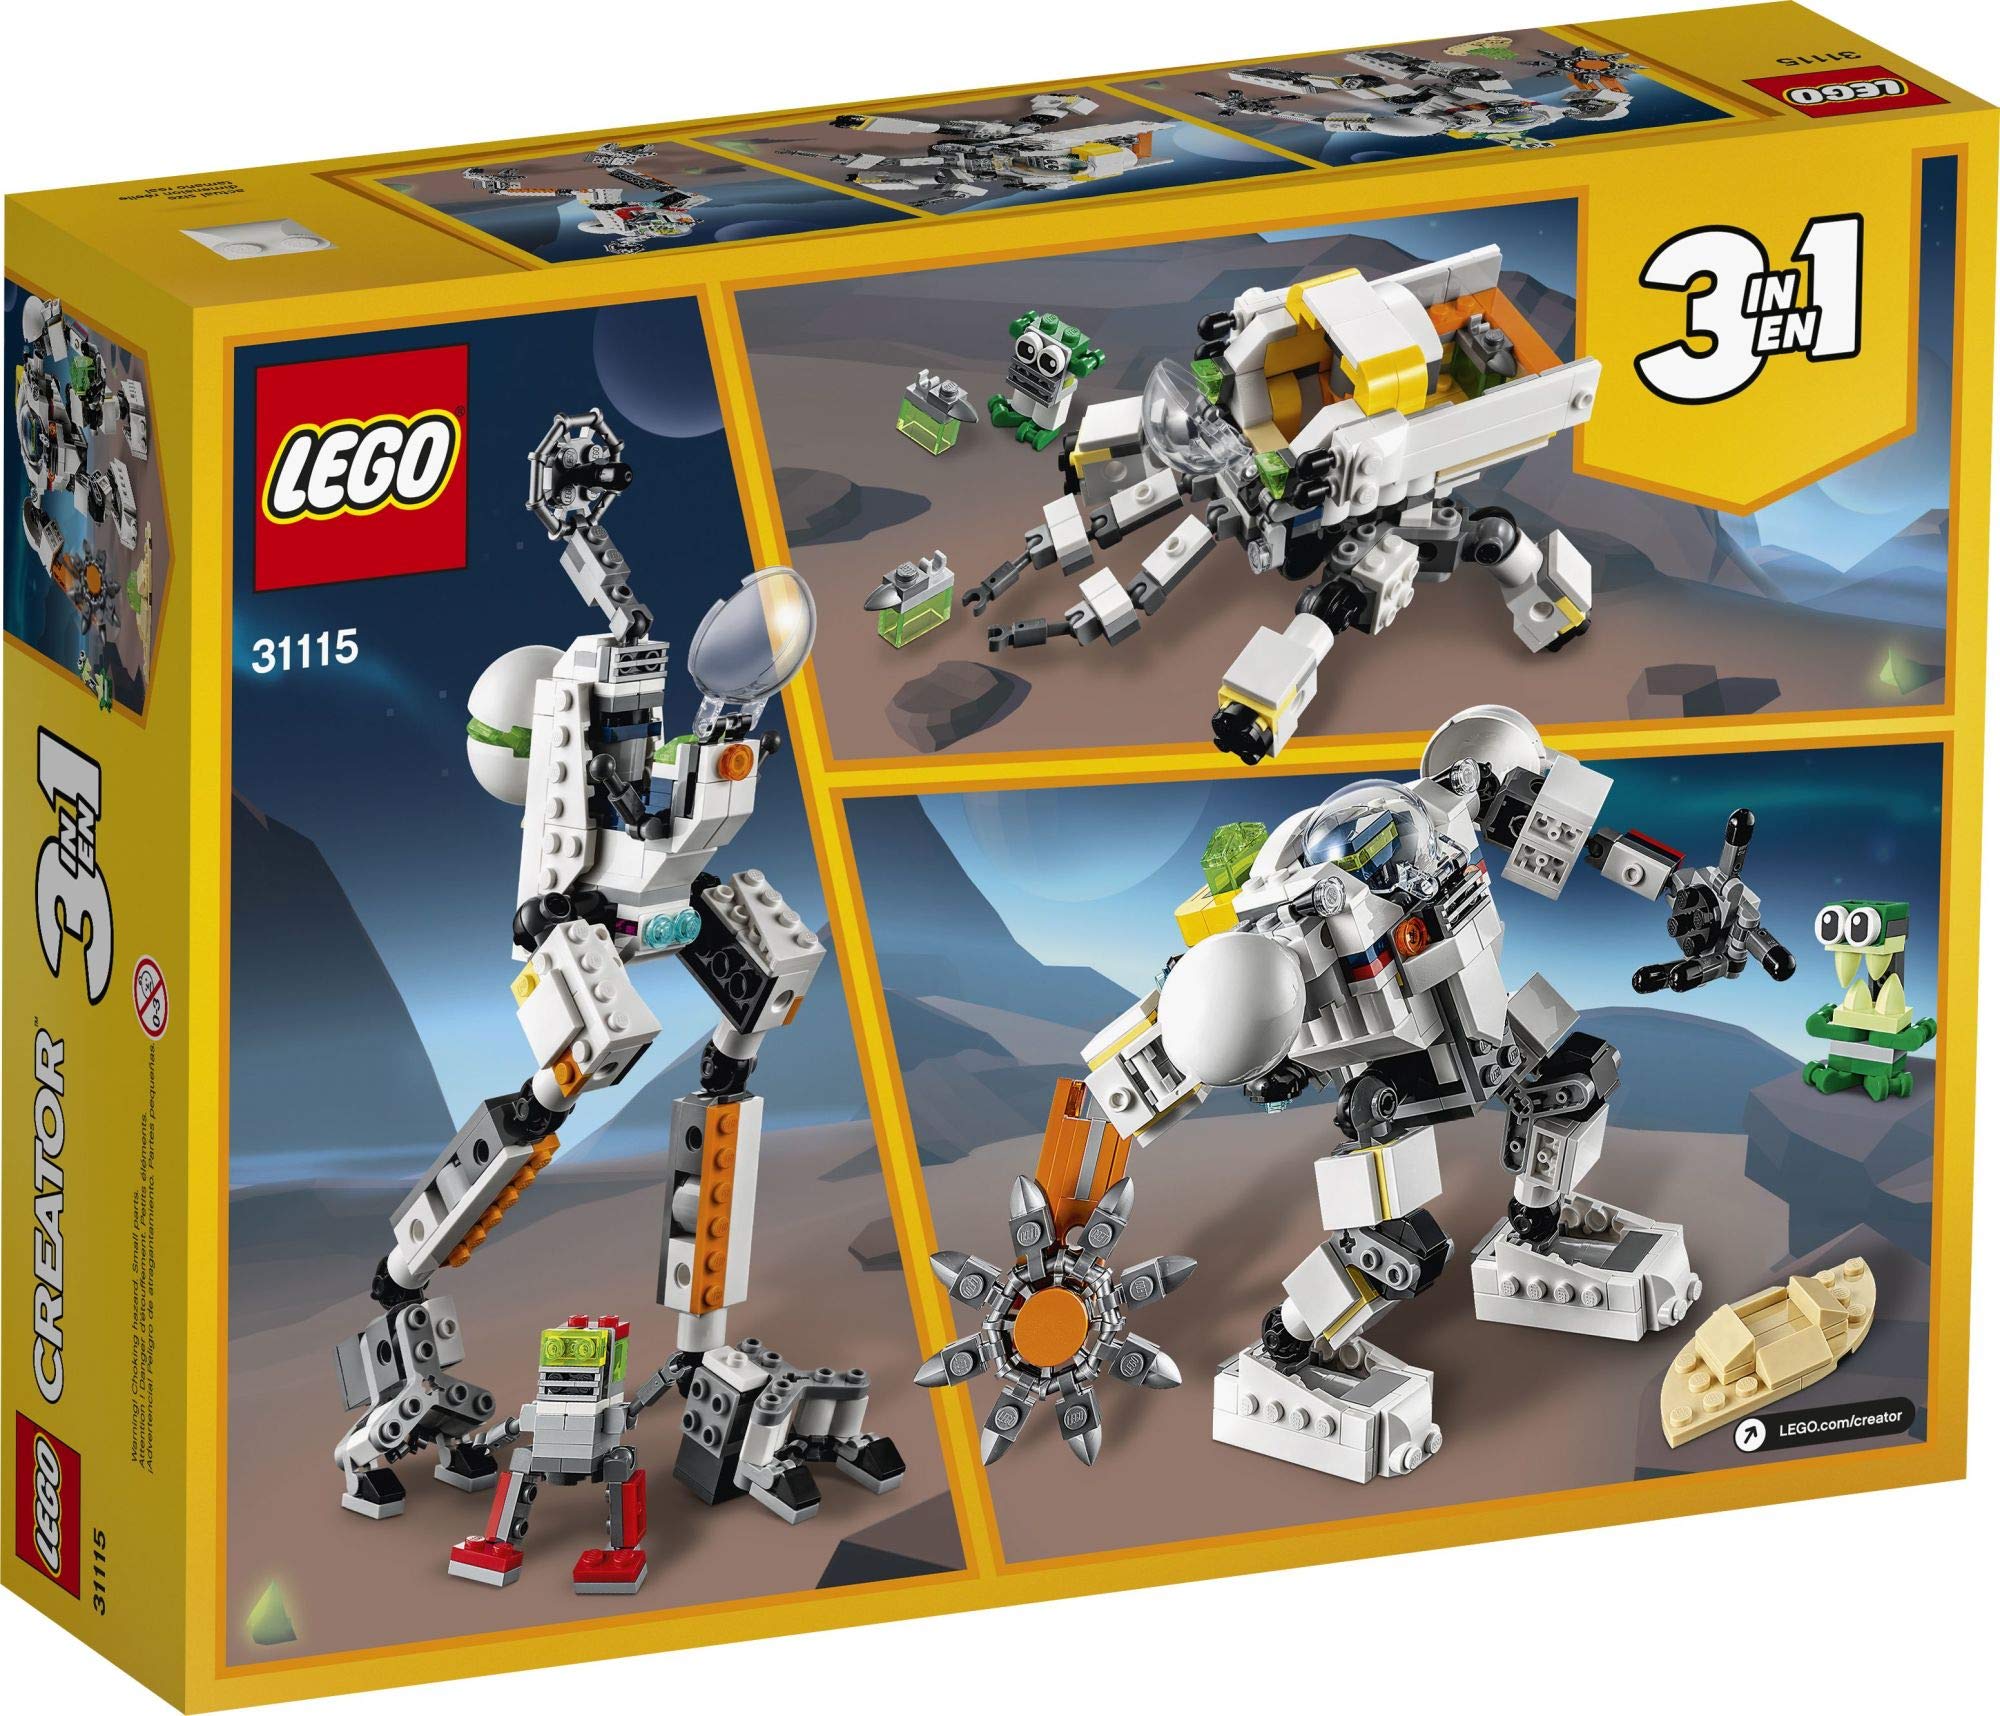 LEGO Creator 3in1 Space Mining Mech 31115 Building Kit Featuring a Mech Toy, Robot Toy and Alien Figure; Makes The Best Toy for Kids Who Love Creative Fun, New 2021 (327 Pieces)